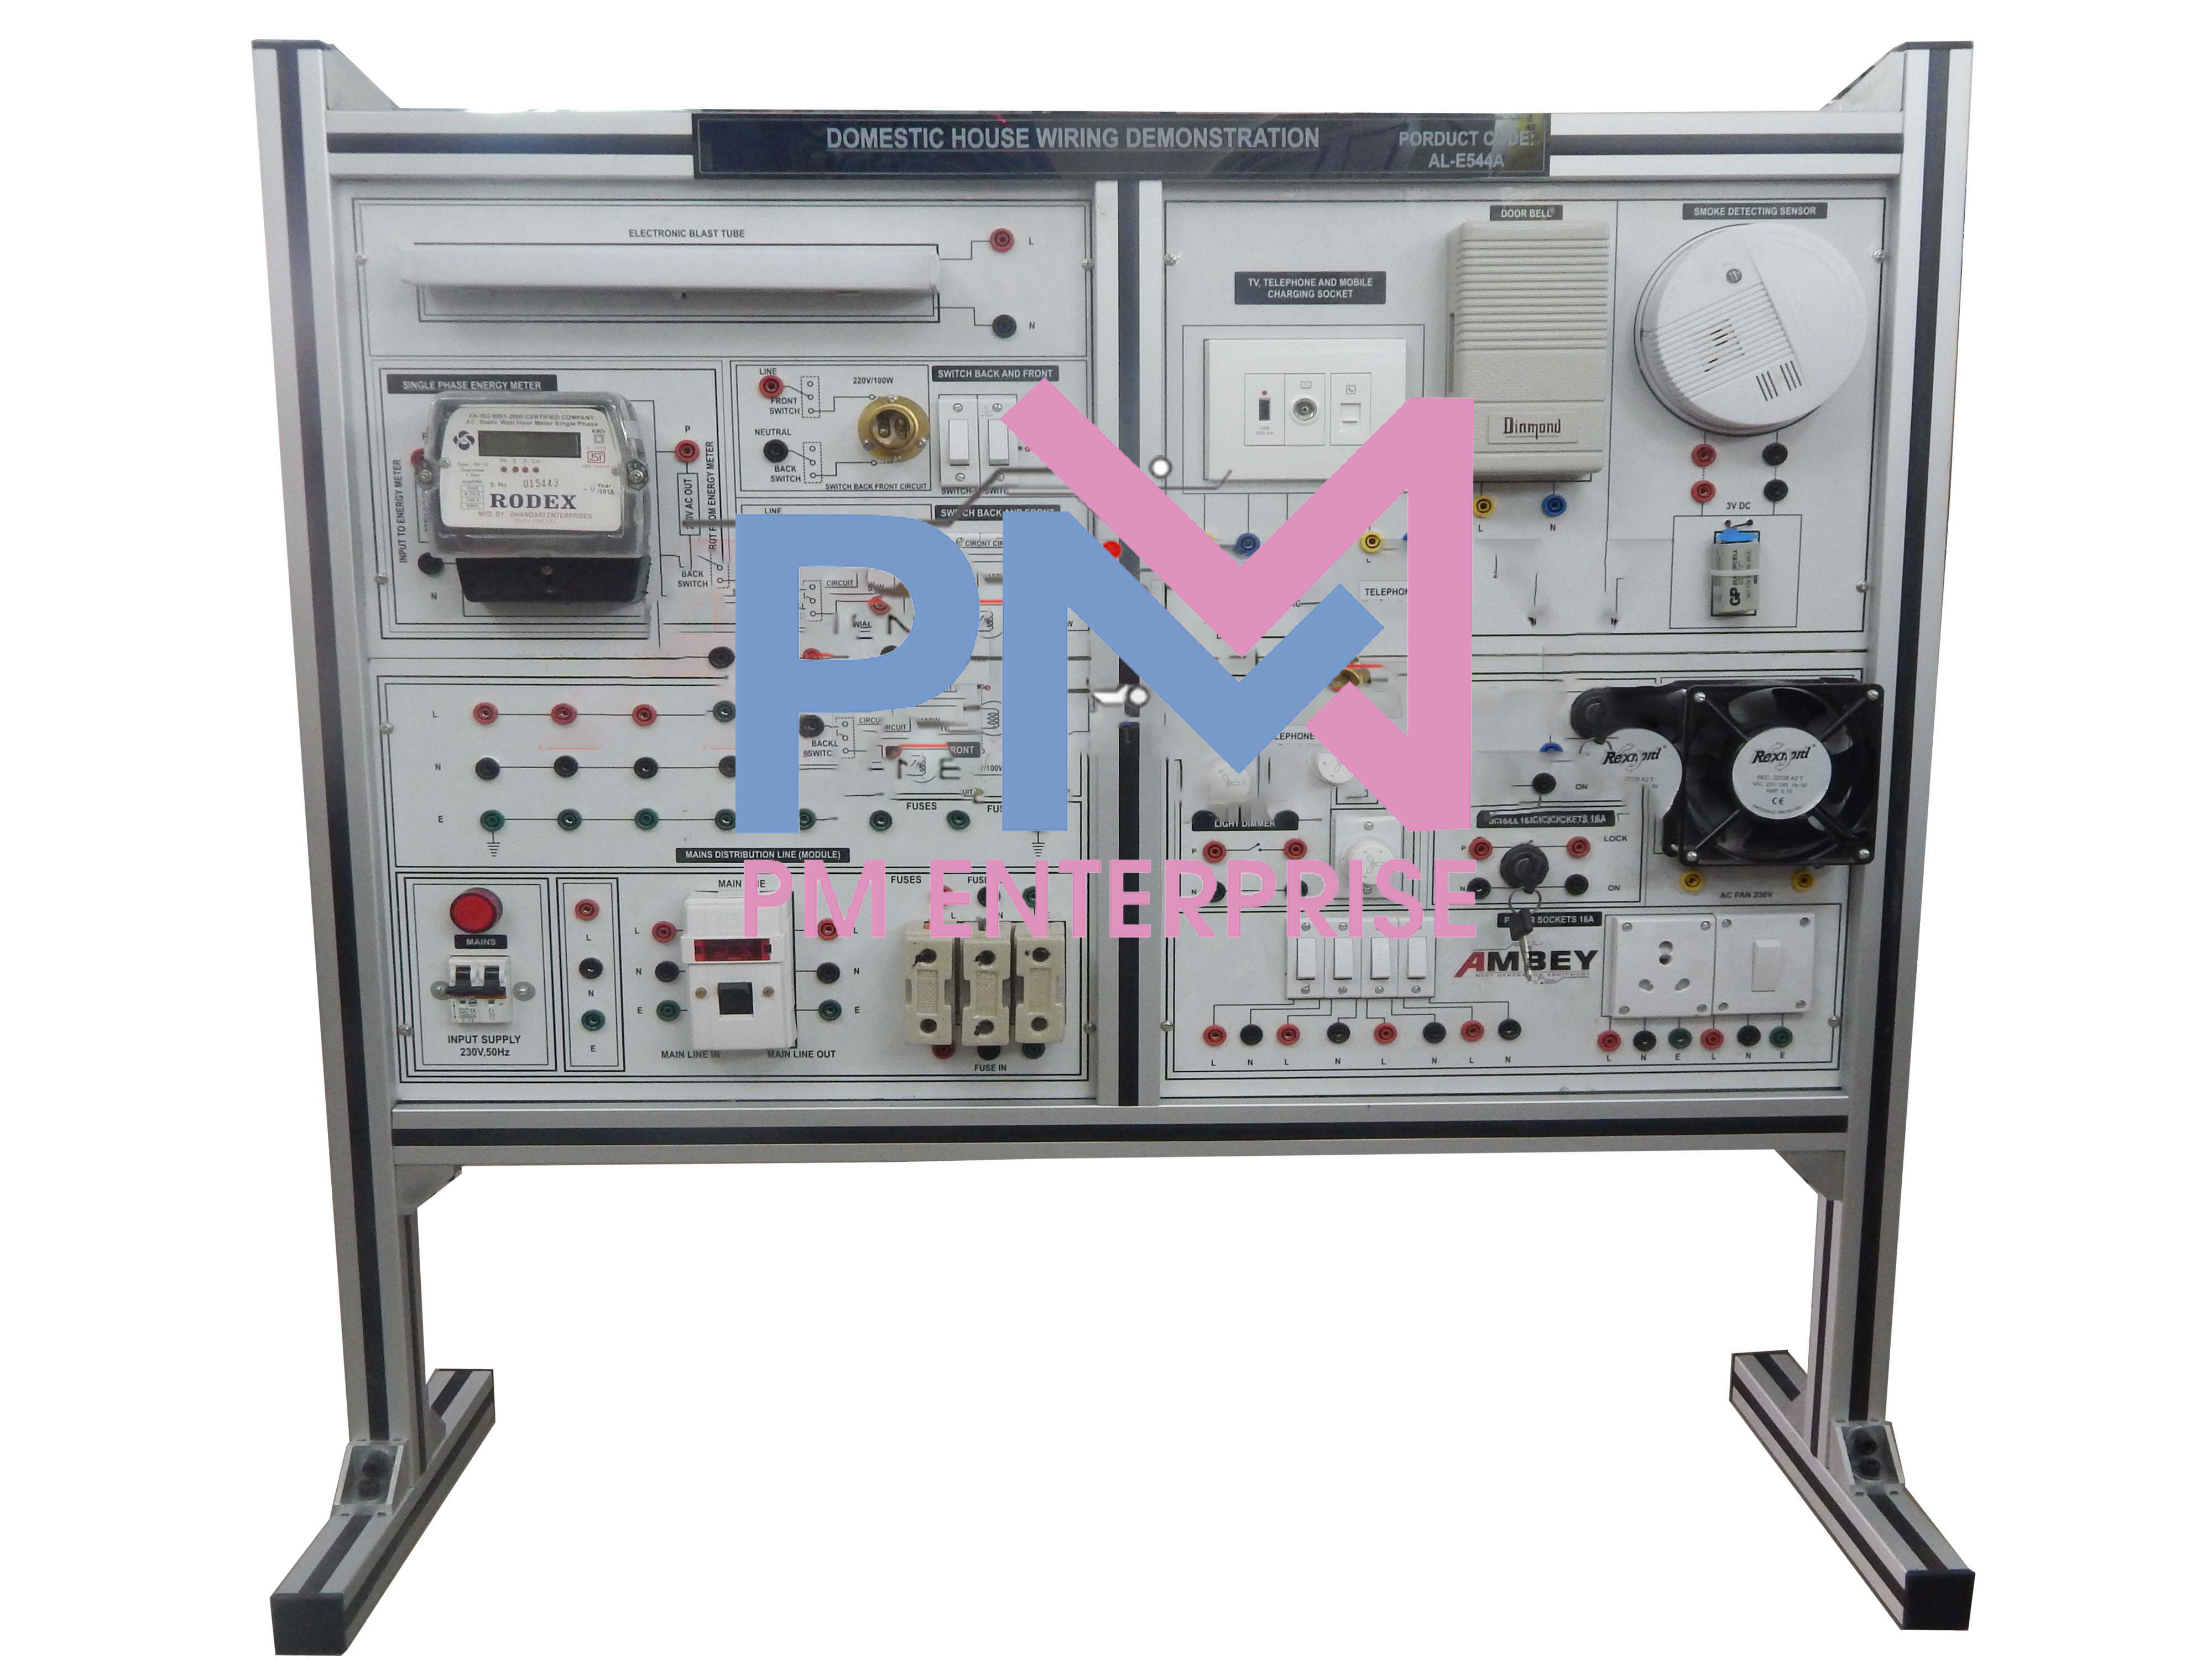 PM-P544A DOMESTIC HOUSE WIRING CONTROL TRAINER